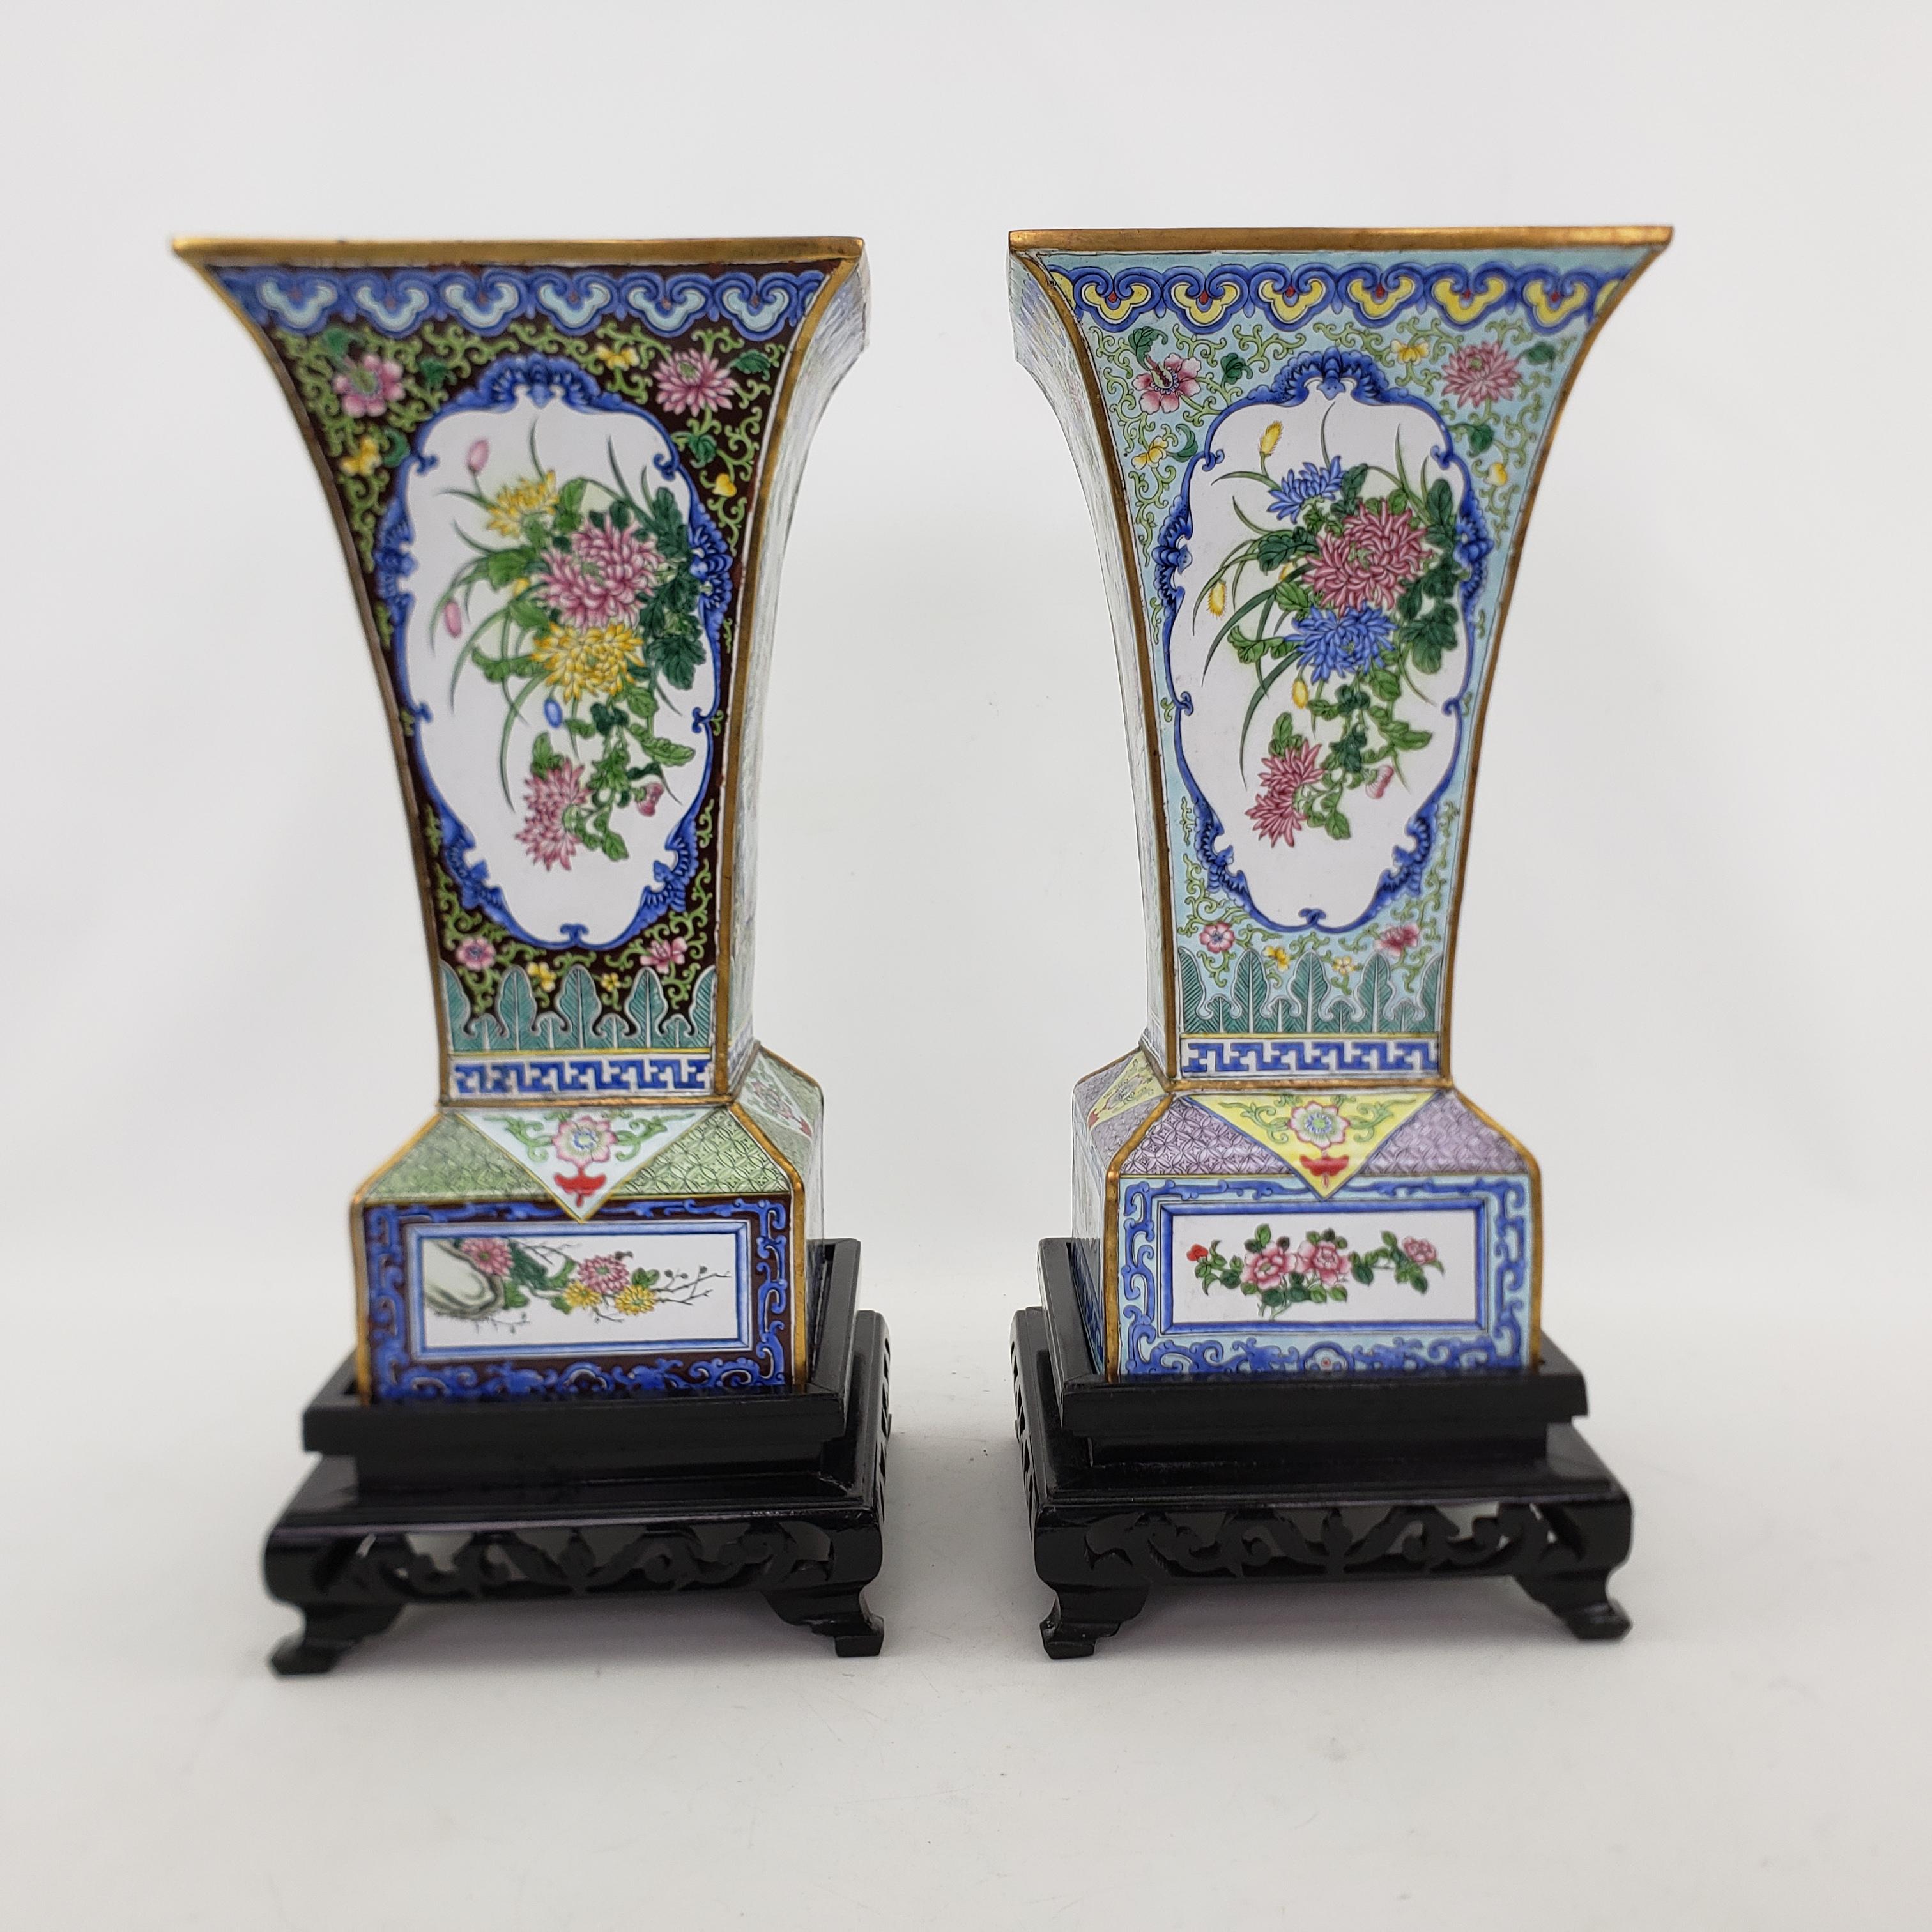 Pair of Mid 20th Century Enameled Copper Vases with Floral & Geisha Decoration For Sale 2